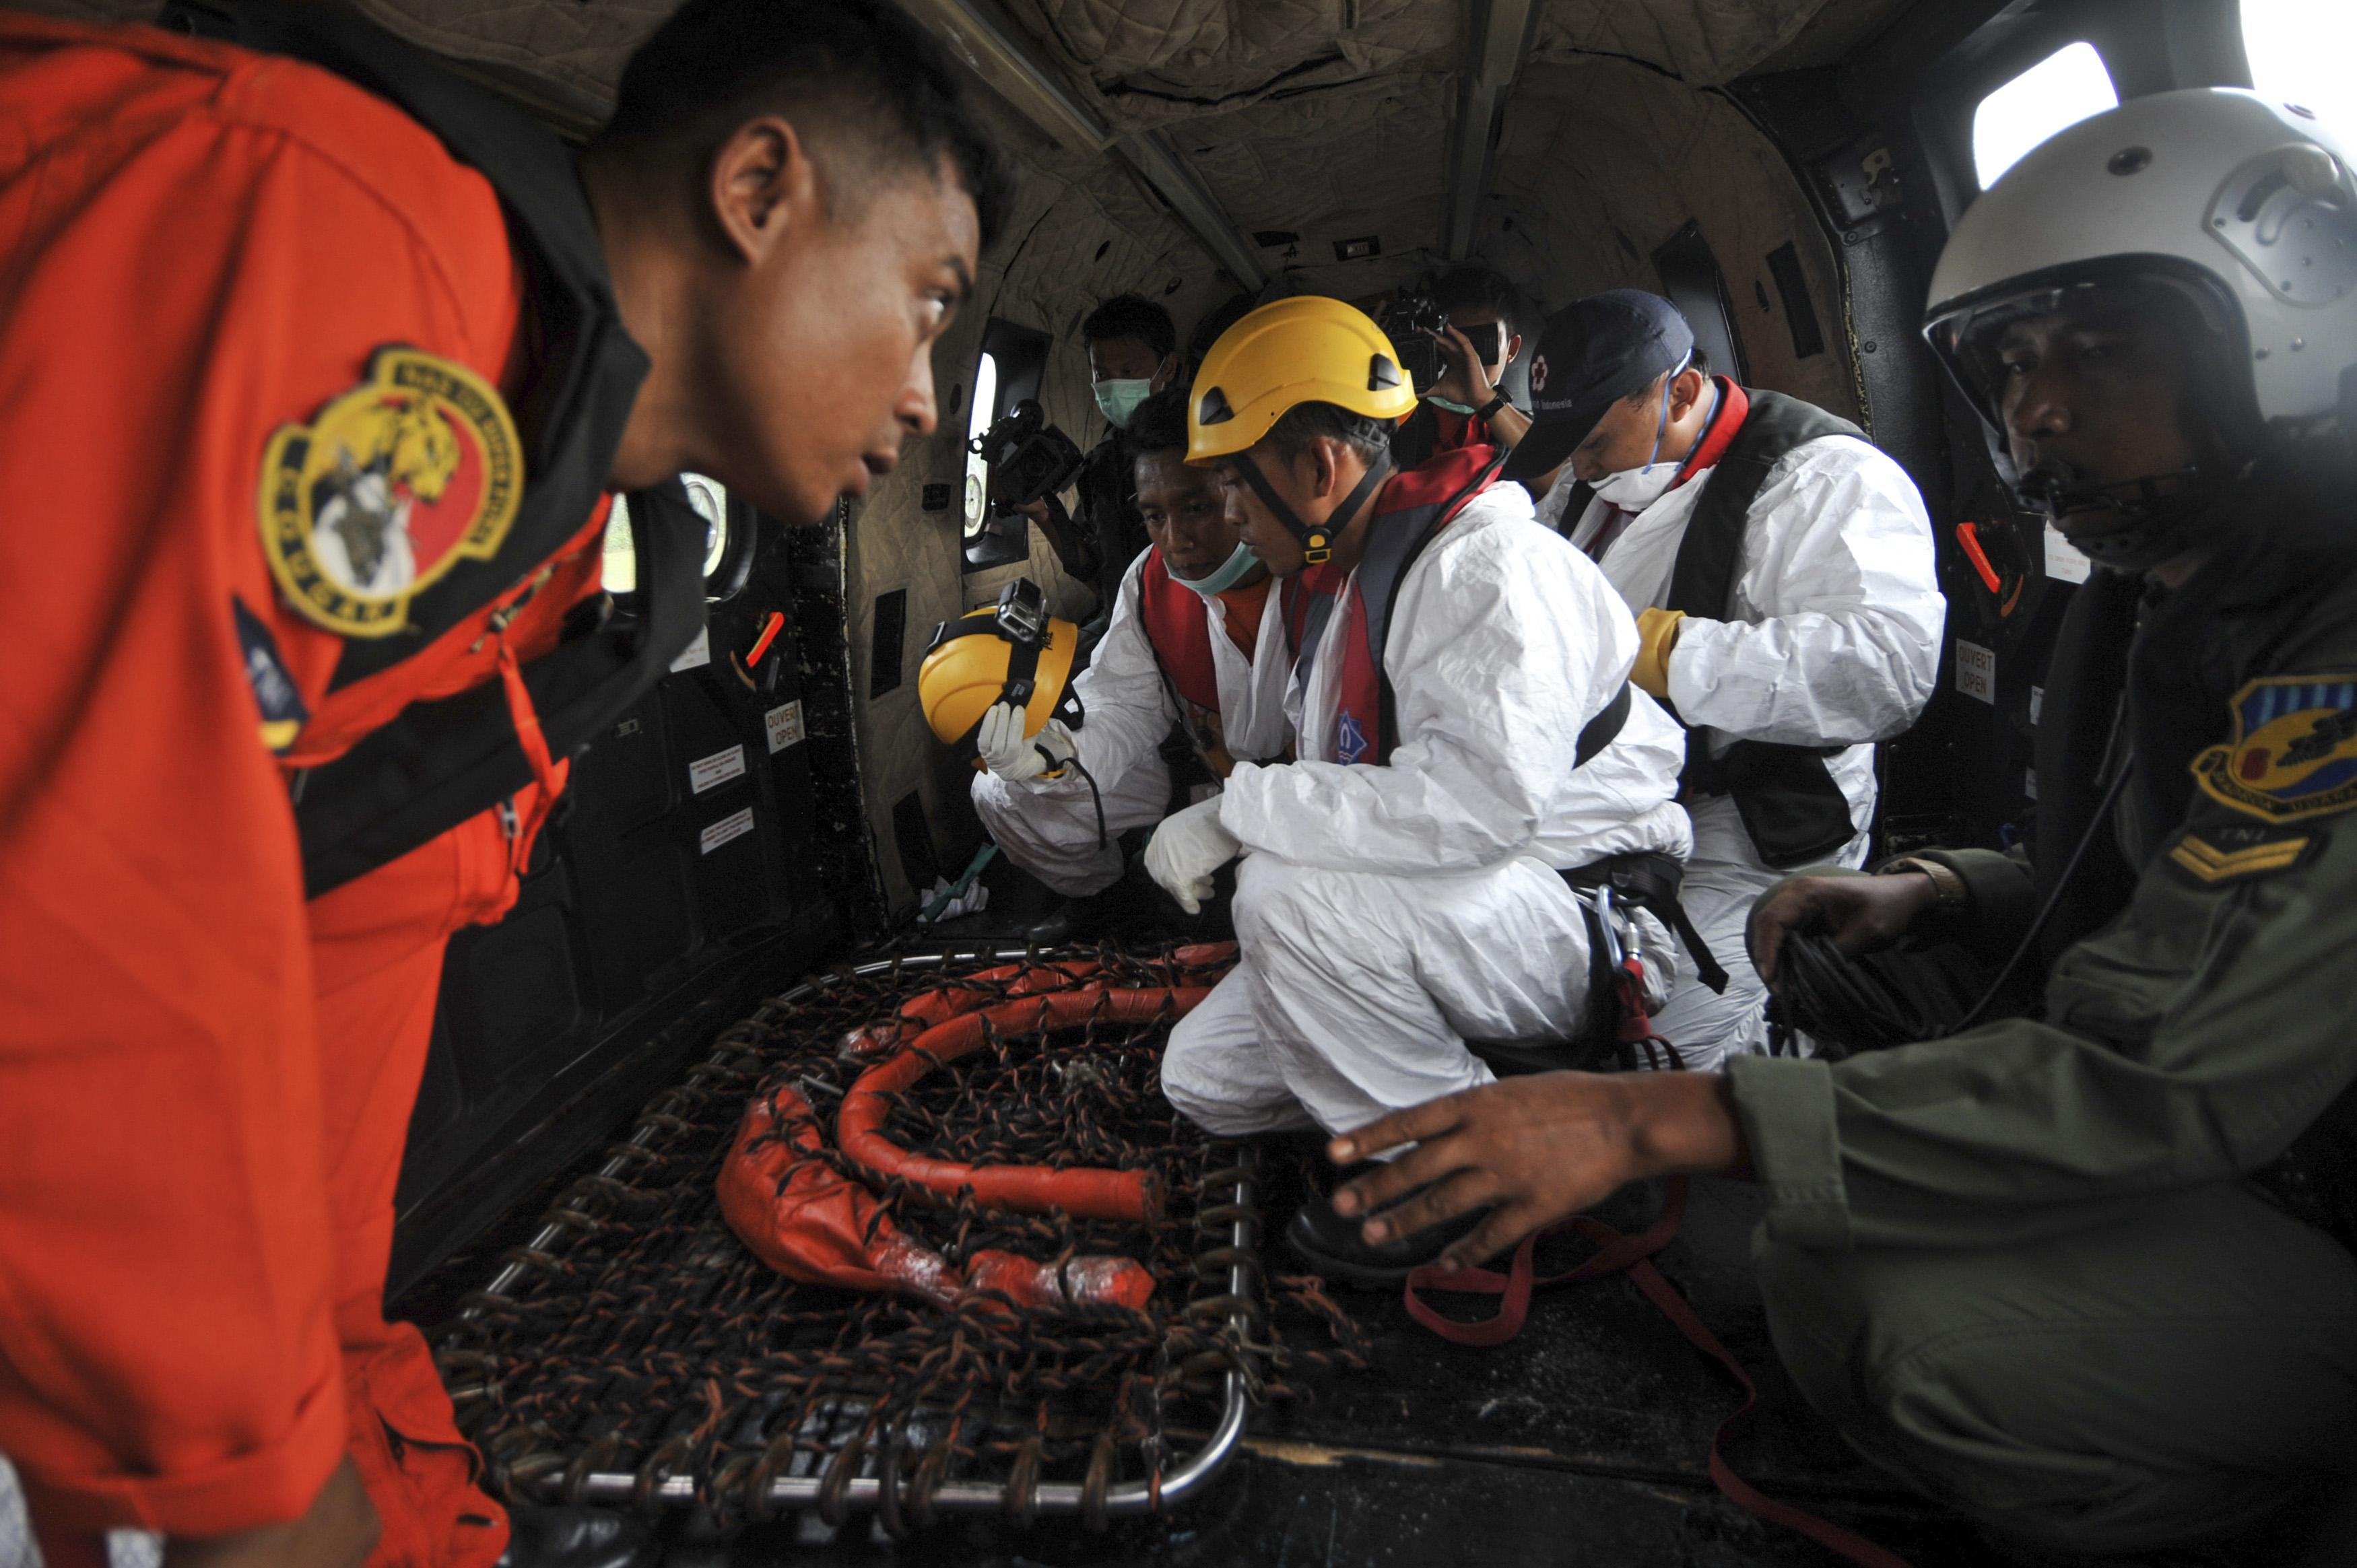 Search-and-rescue workers and flight crew prepare their gear on board an Indonesian air force's Super Puma helicopter at Iskandar air-force base in Pangkalan Bun, Indonesia, before a search mission for debris and bodies from AirAsia Flight QZ 8501 on  Jan. 6, 2015 (Veri Sanovri—Reuters)